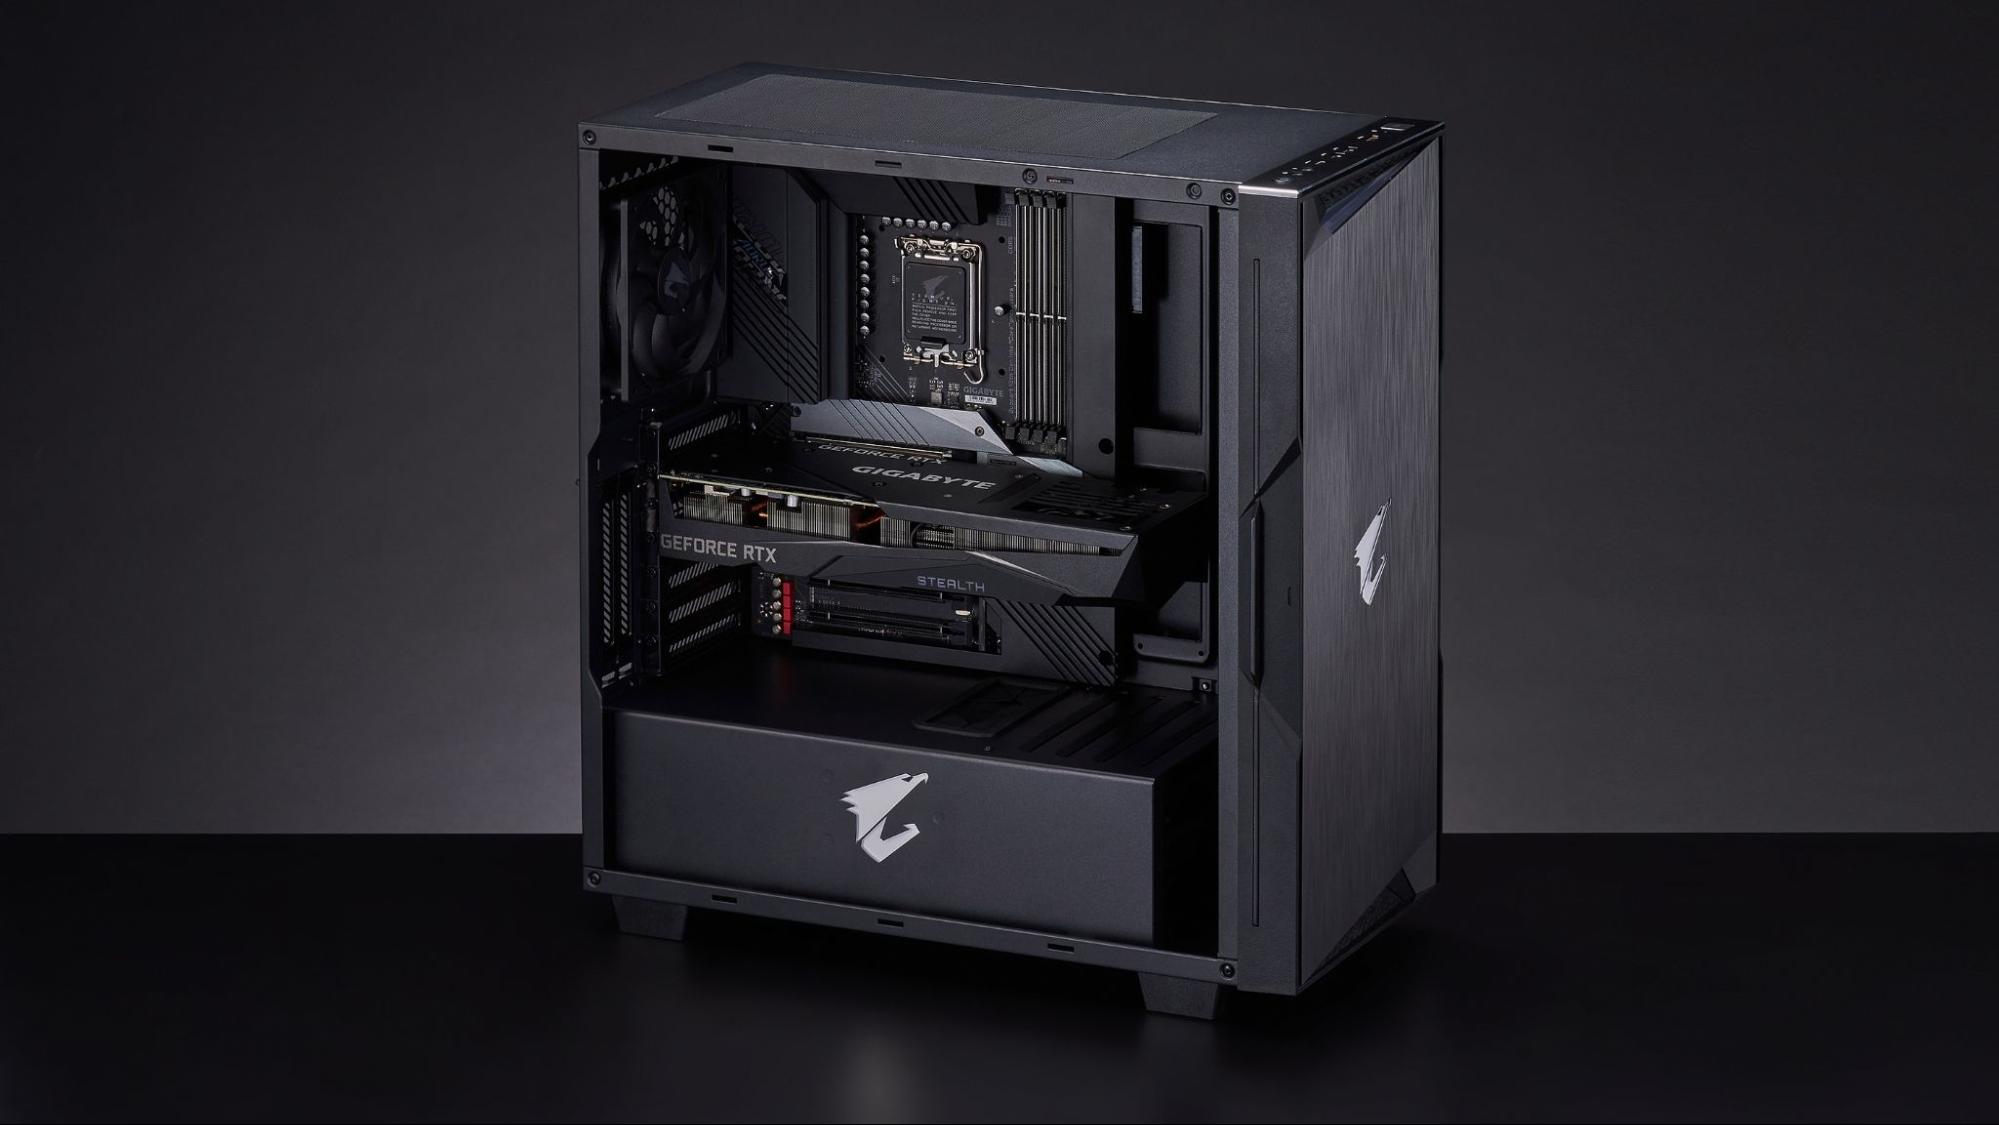 Gigabyte Project Stealth